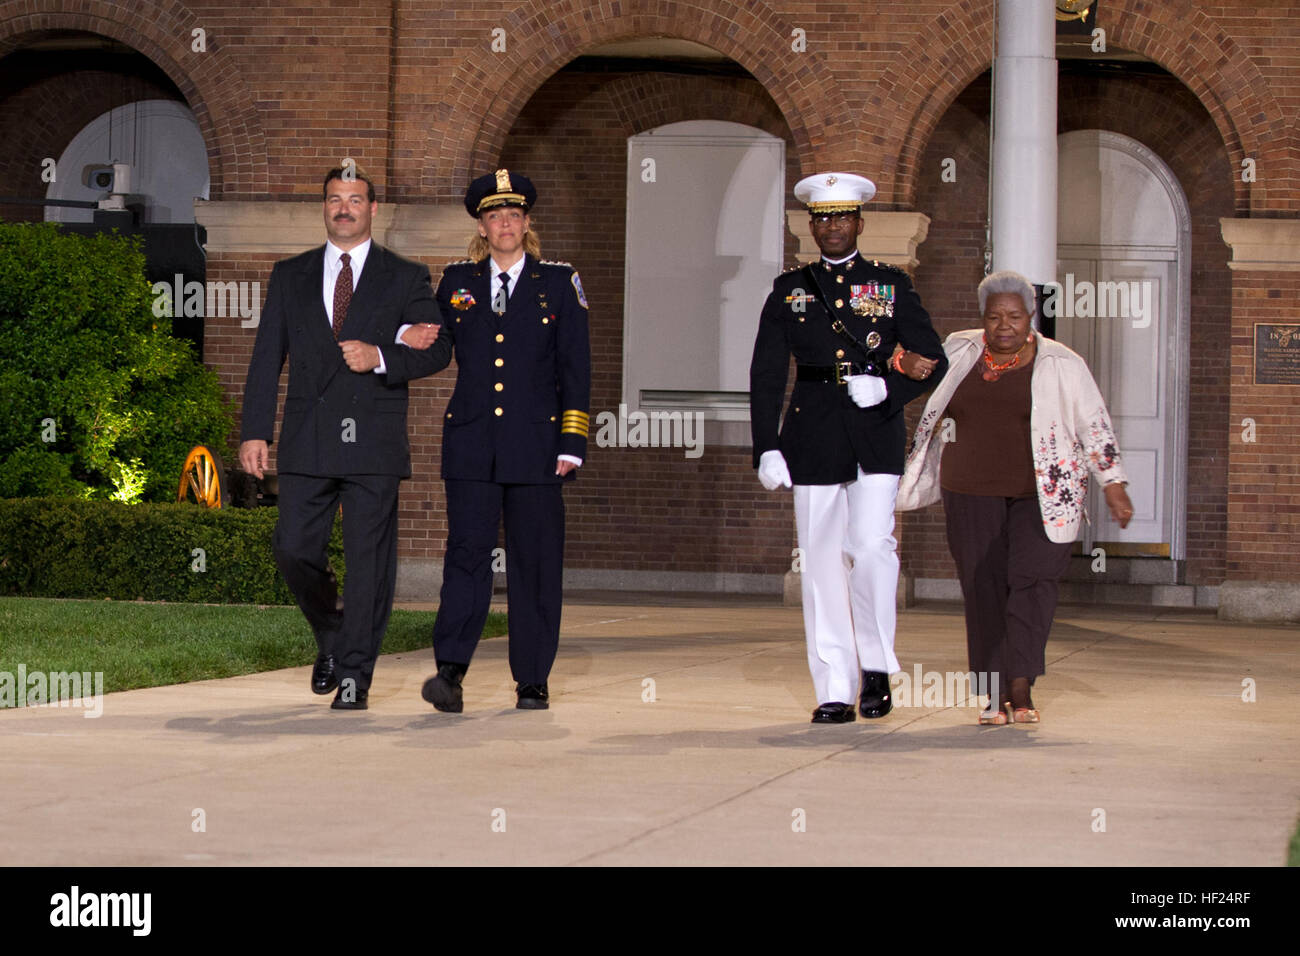 From left, U.S. Park Police Capt. Charles Guddemi; the Evening Parade guest of honor, Metropolitan Police Department Chief Cathy L. Lanier; the parade host, U.S. Marine Lt. Gen. Ronald L. Bailey, deputy commandant of Plans, Policies, and Operations; and Martha Bailey, walk down center walk during an Evening Parade at Marine Barracks Washington in Washington, D.C., May 9, 2014. The Evening Parades are held every Friday night during the summer months. (U.S. Marine Corps photo by Lance Cpl. Samantha Draughon/Released) Evening Parade 140509-M-EL431-321 Stock Photo